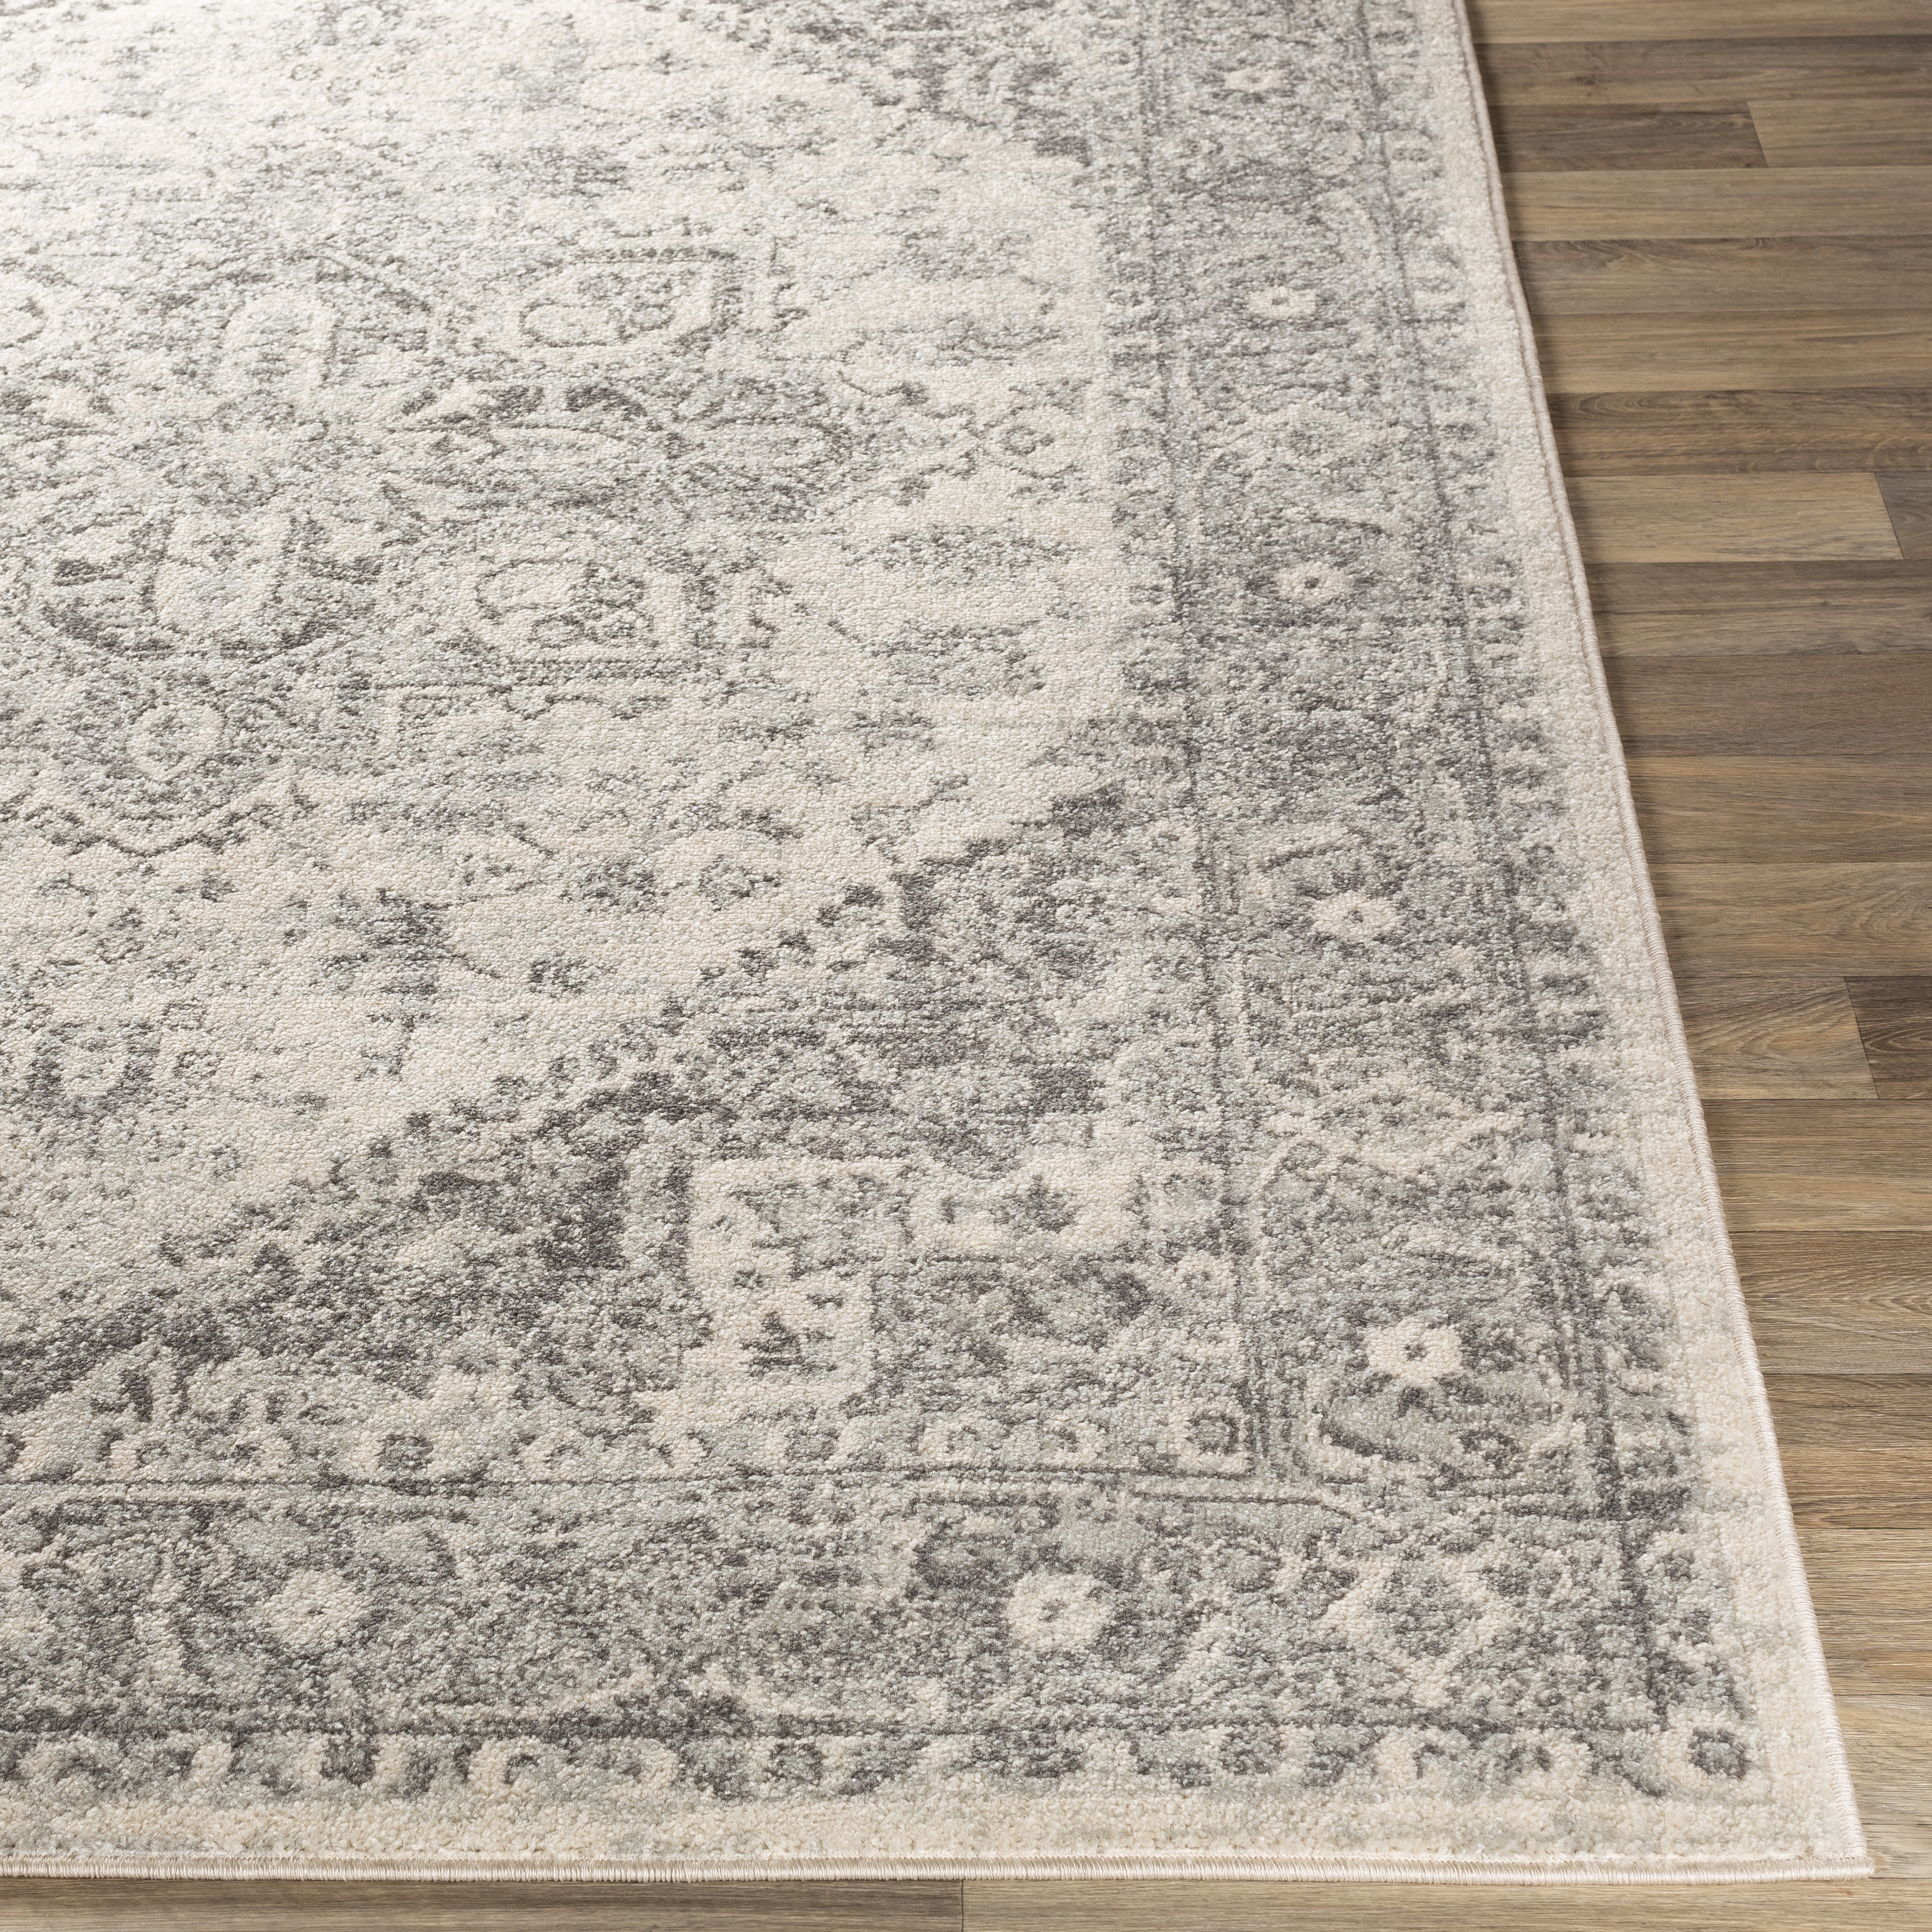 Chester Rug, 8'10" x 12' - Image 5